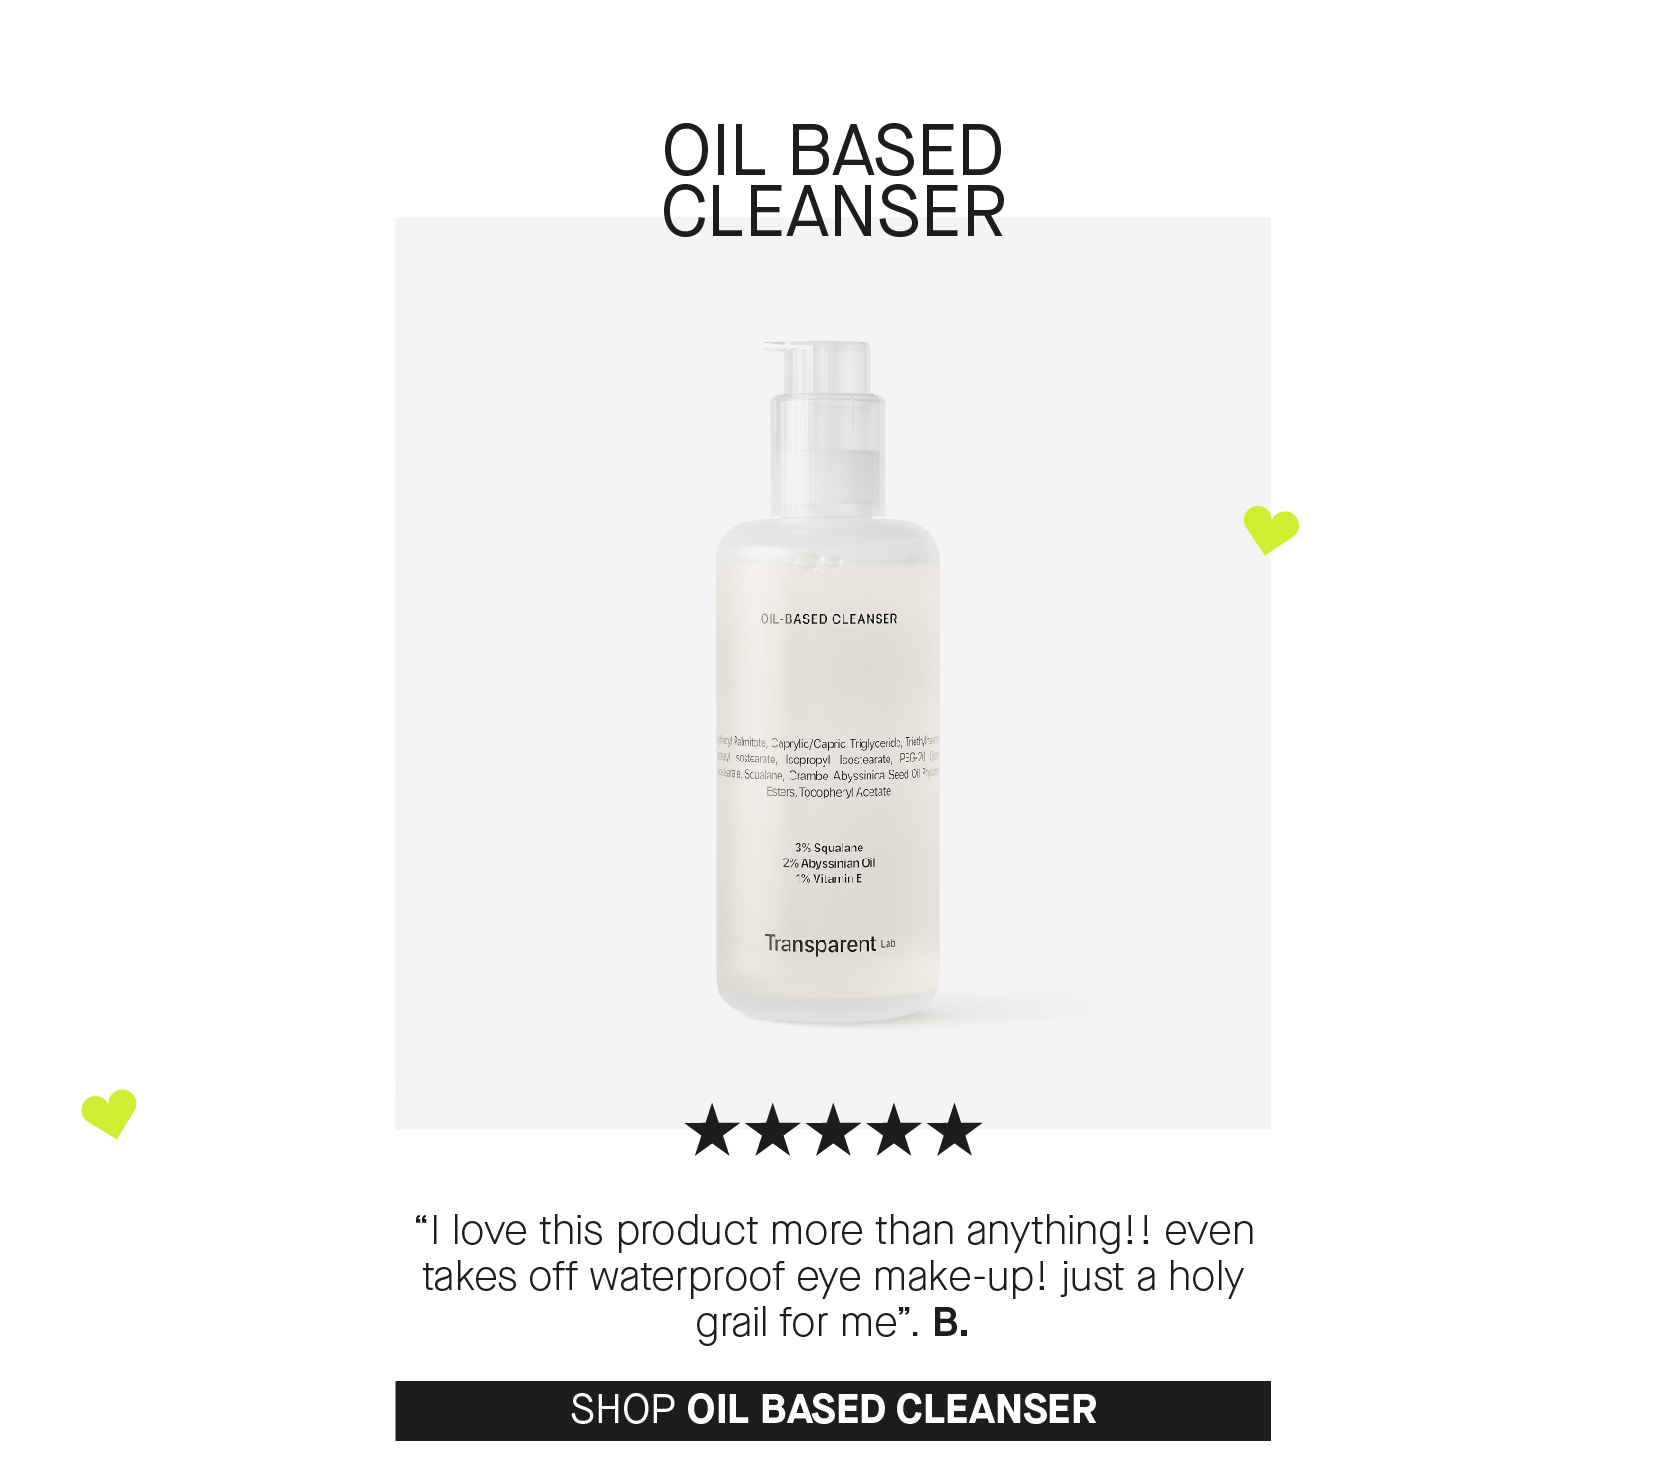 OIL BASED CLEANSER L-BASED CLEANSER 2 Abyssinian Ol % Vilarin E Transparent Yk Kk ok I love this product more than anything!! even takes off waterproof eye make-up! just a holy grail for me. B. SHOP OIL BASED CLEANSER 